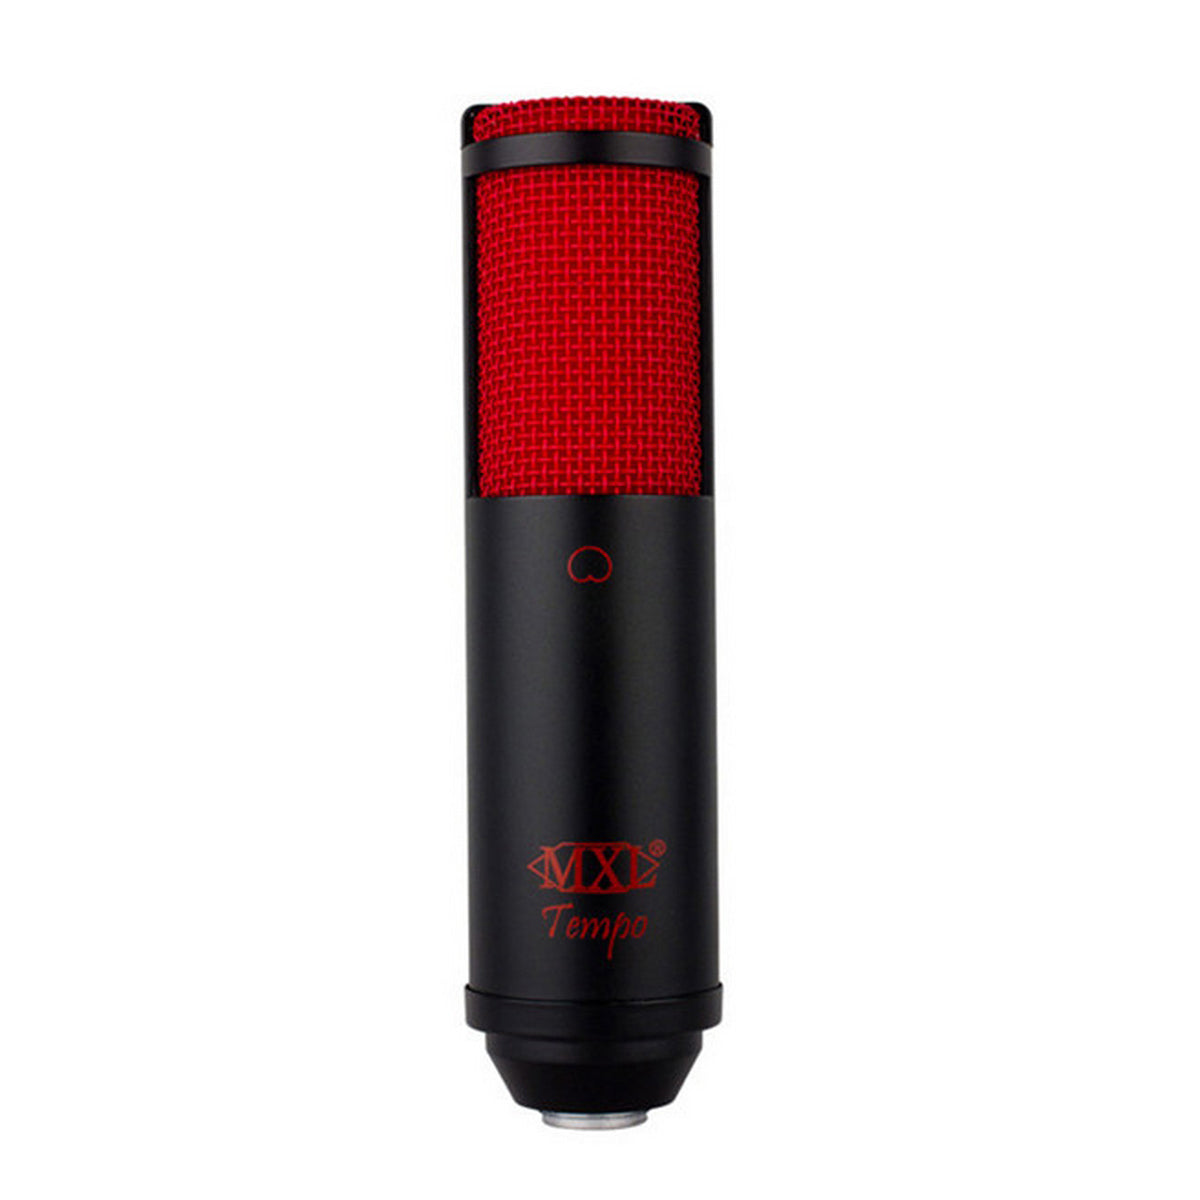 MXL Tempo KR USB Powered Condenser Microphone Record Vocal Podcasts Video Chats (Used)